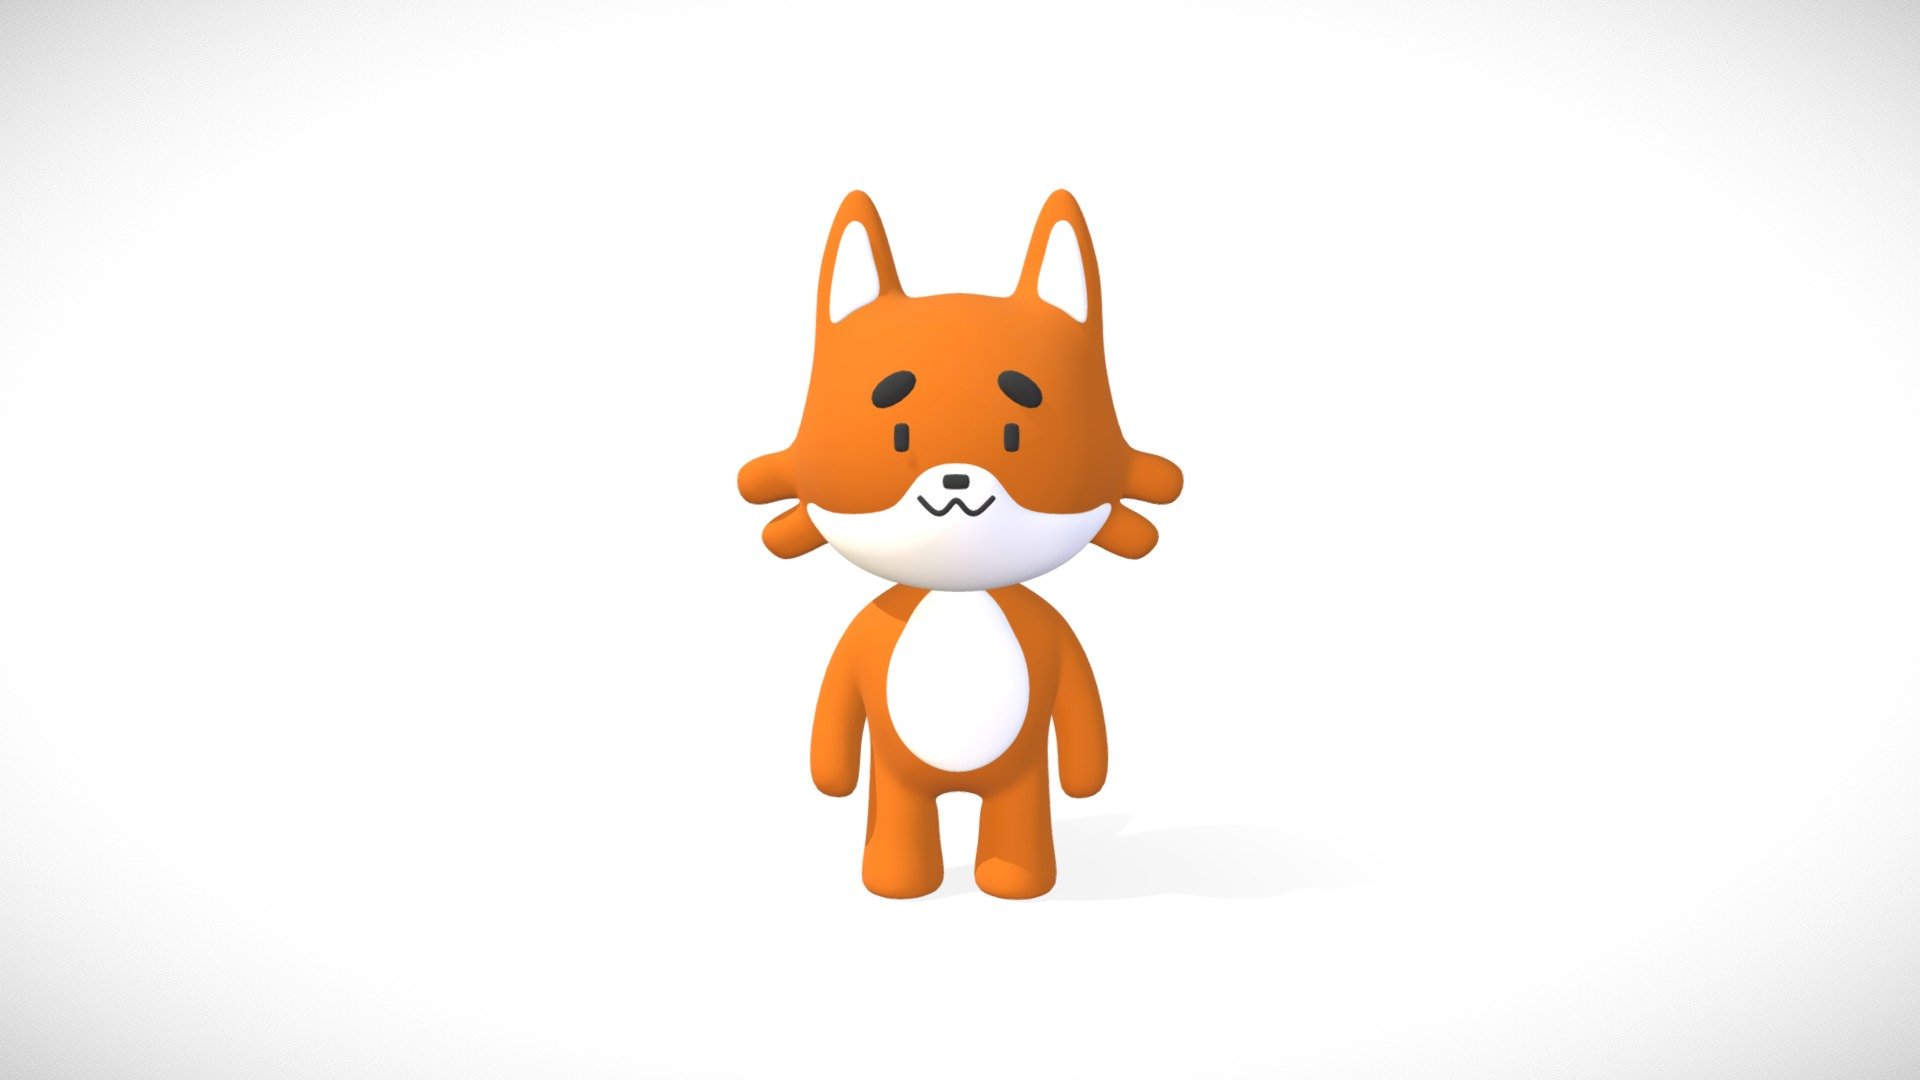 Happy to share my recent 3D artwork of the fox modelled in the blender and rendered in cycles. Also included some of the rendered styles to get a feel of the new look and video to get a view from a different perspective.

I will be posting more 3D artwork soon. Feel free to reach out if you're interested in hiring me for nft or any other 3D artwork for your games or animated videos. 

checkout my more work on artstation.com/ameeerr - 3D stylized fox game character - Download Free 3D model by ameeerr 3d model